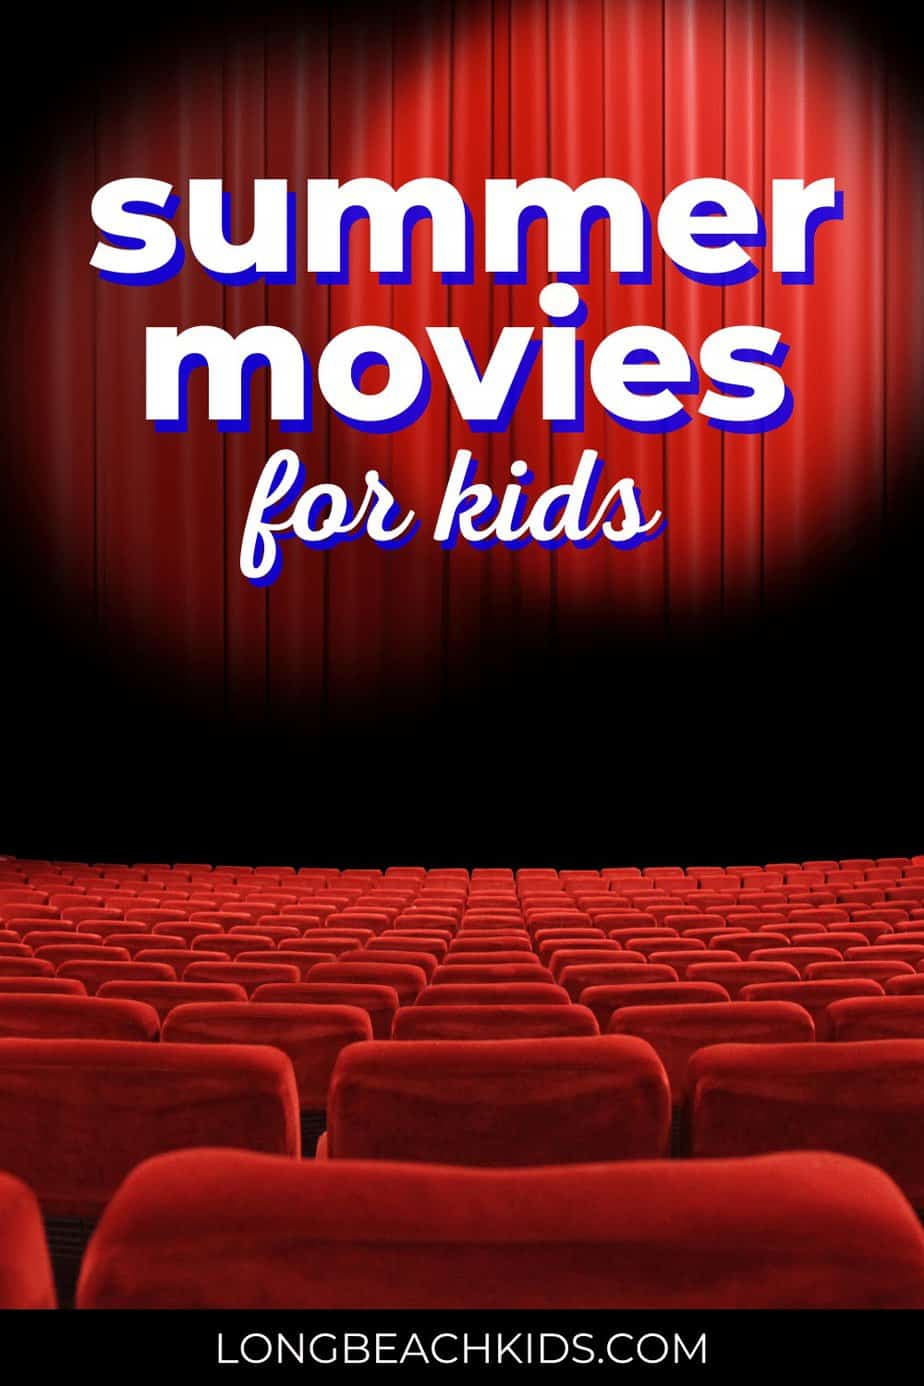 movie theater screen; text: summer movies for kids